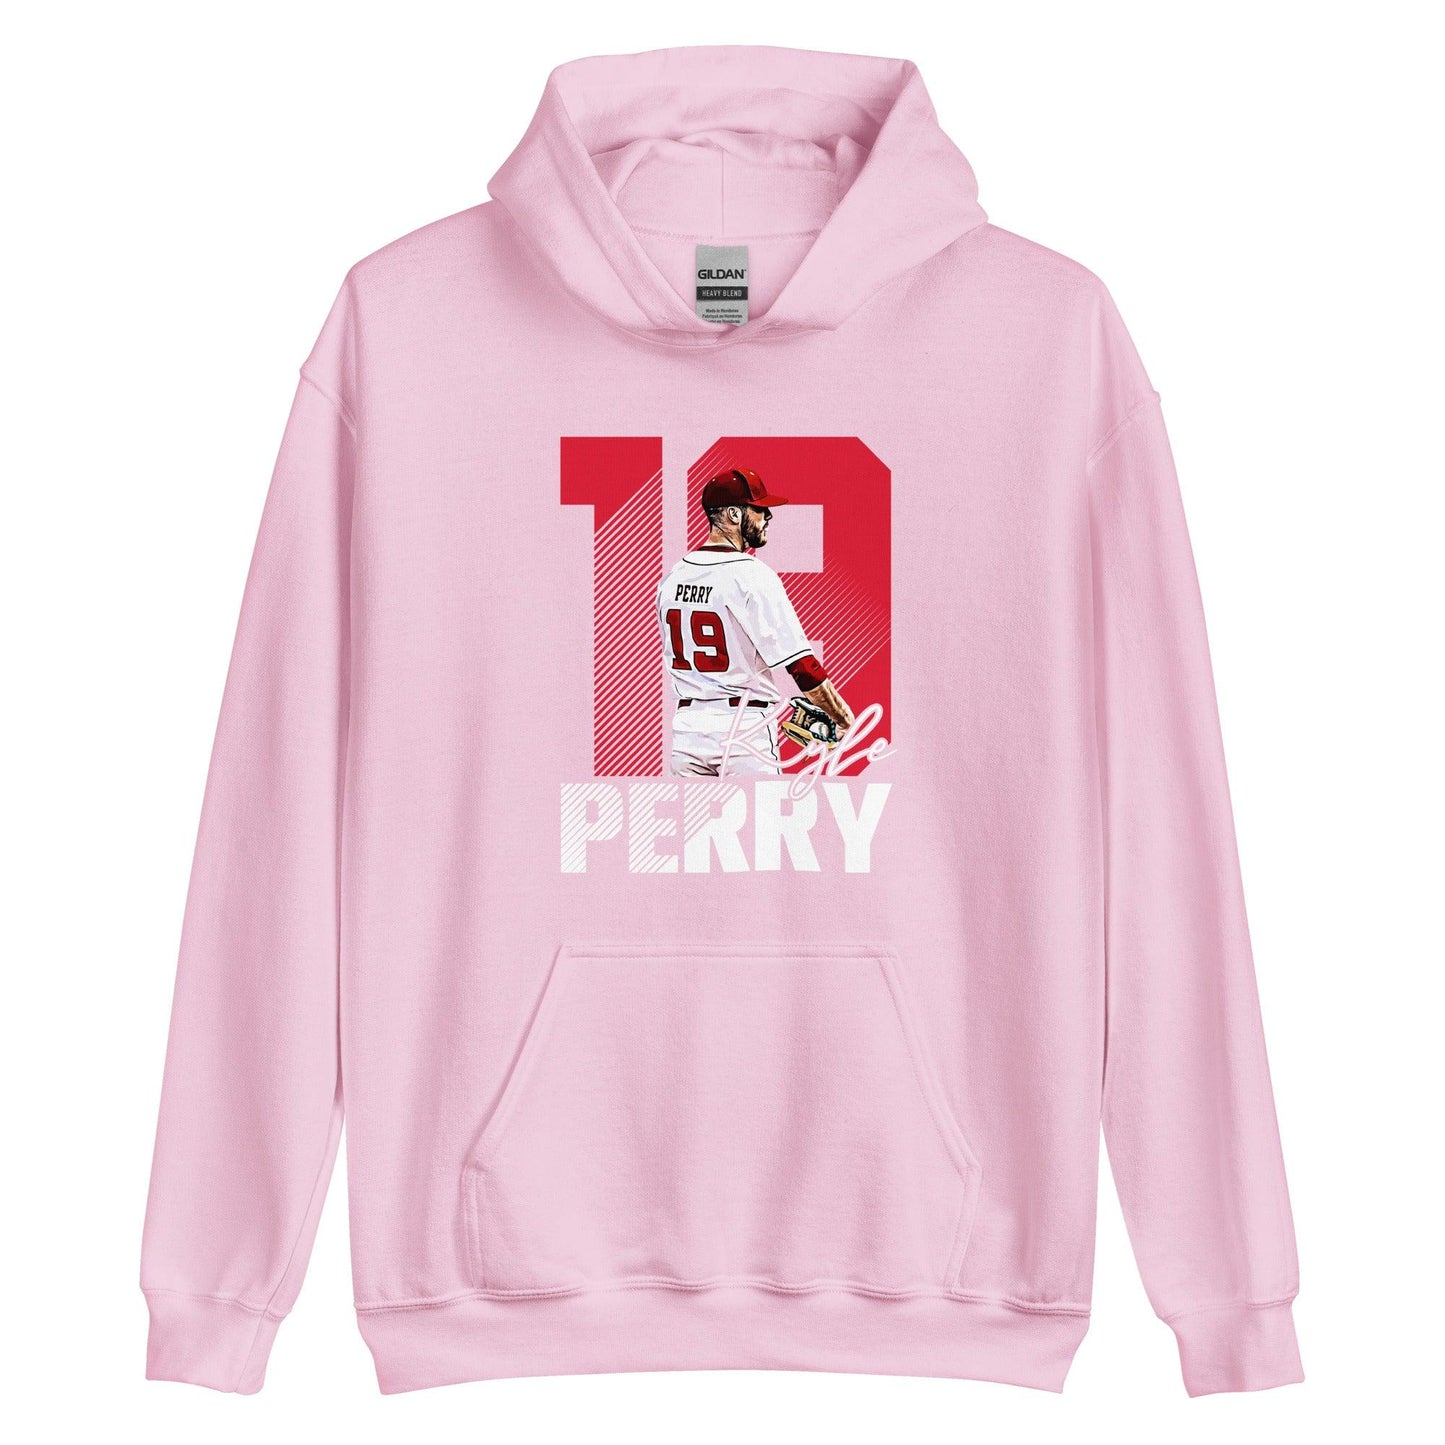 Kyle Perry "Gameday" Hoodie - Fan Arch